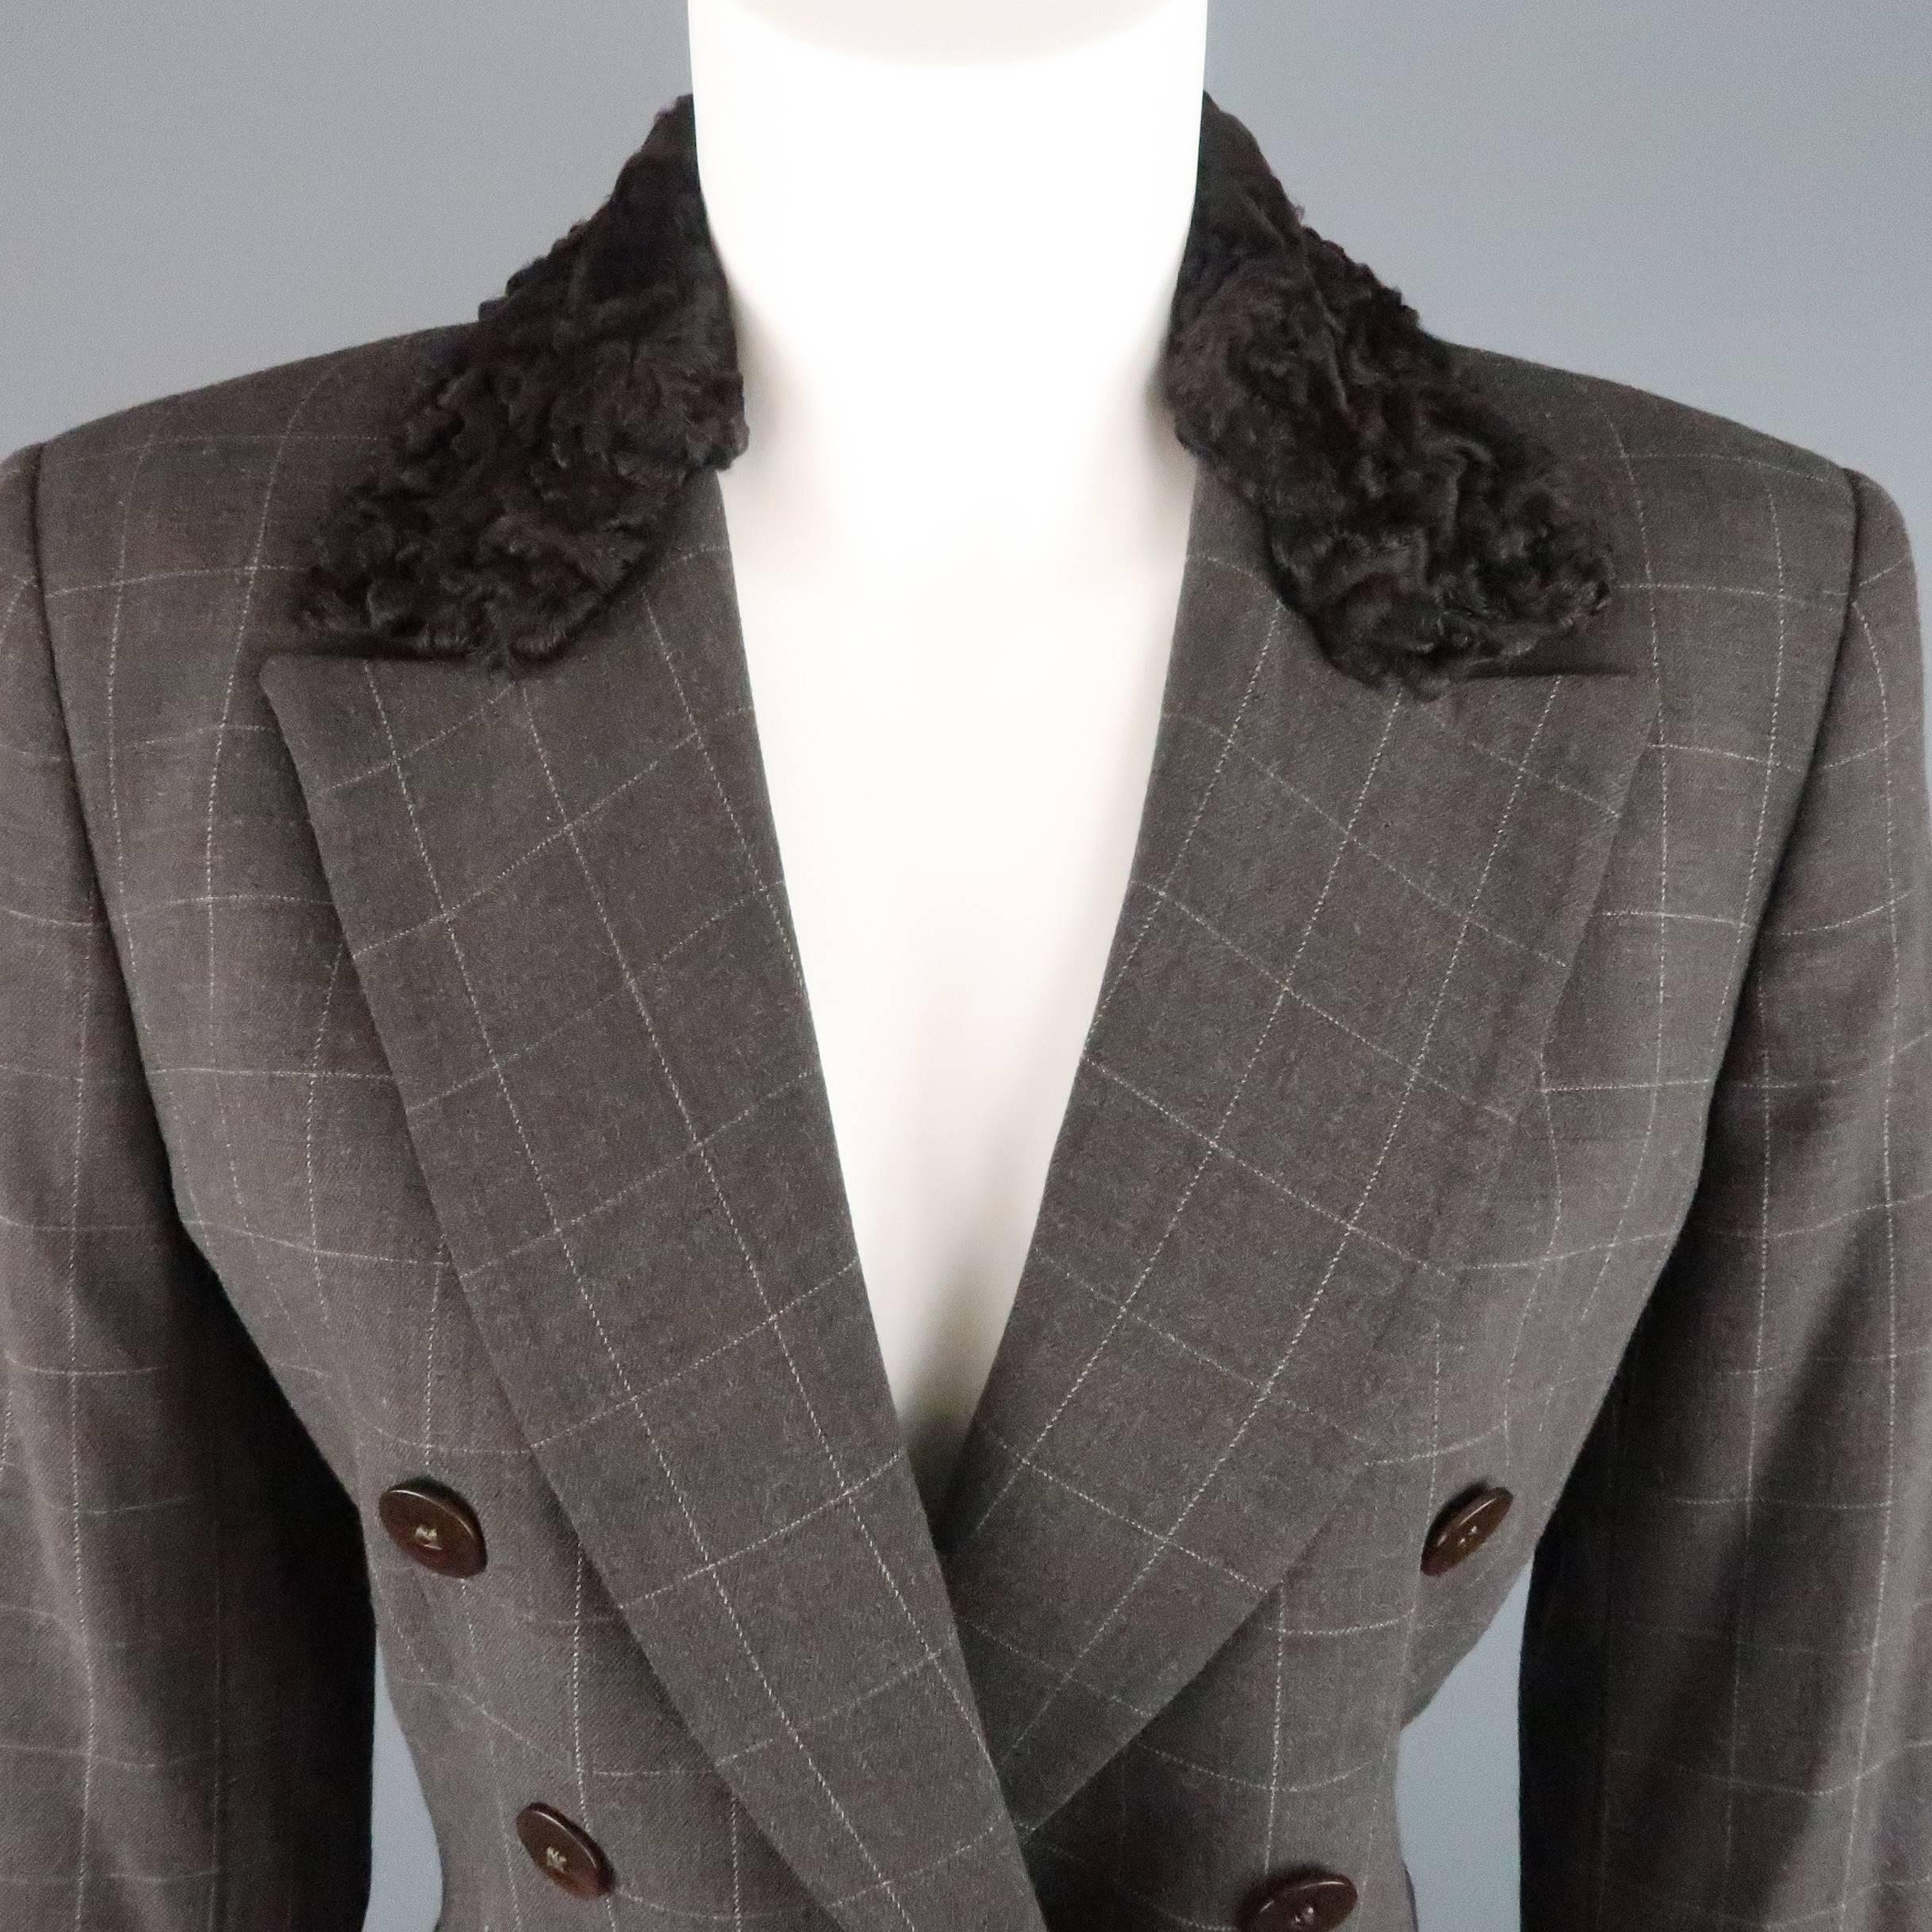 Le COLLEZIONI by GIORGIO ARMANI double breasted sport coat comes in a muted taupe windowpane print wool and features a peak lapel with fur collar. Made in Italy.
 
Good Pre-Owned Condition.
Marked: 40 / 6
 
Measurements:
 
Shoulder: 16 in.
Bust: 40